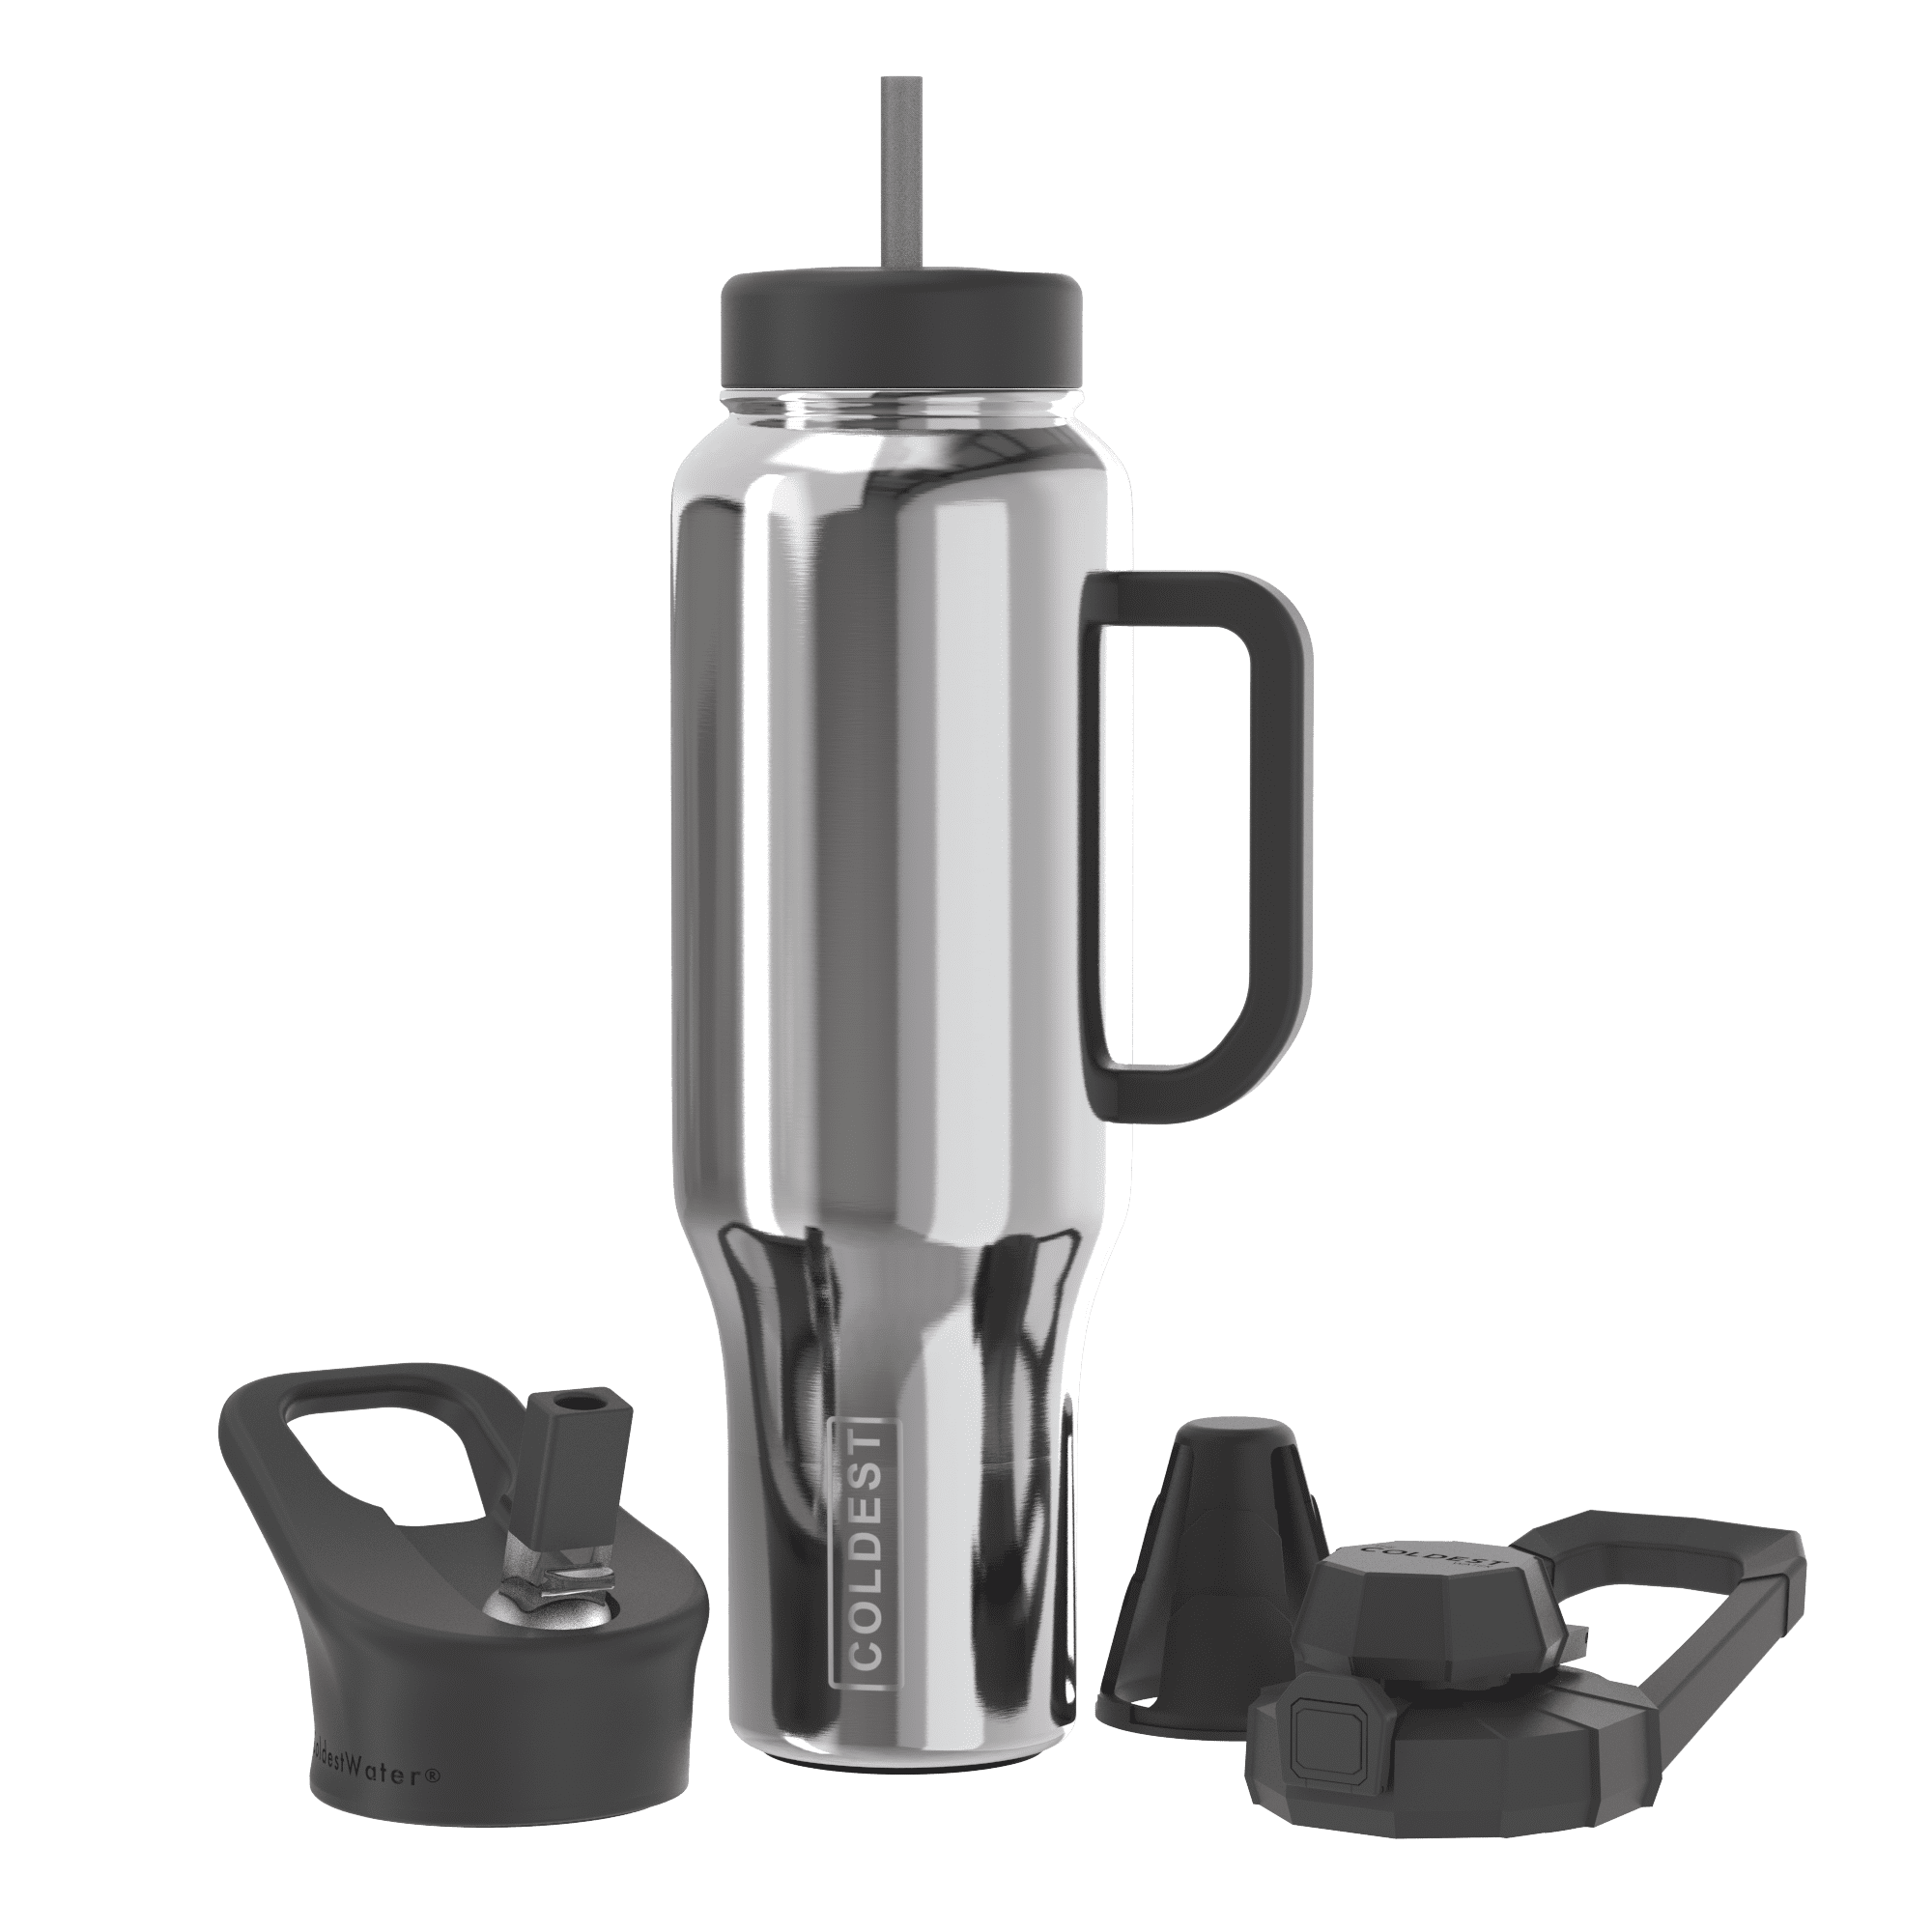 Cirkul - 📣 NEW PRODUCT ALERT! The family is complete! The 12oz  Stainless-Steel Mini Bottles are the perfectly portable solution for toting  around ice cold water all day long, and not to